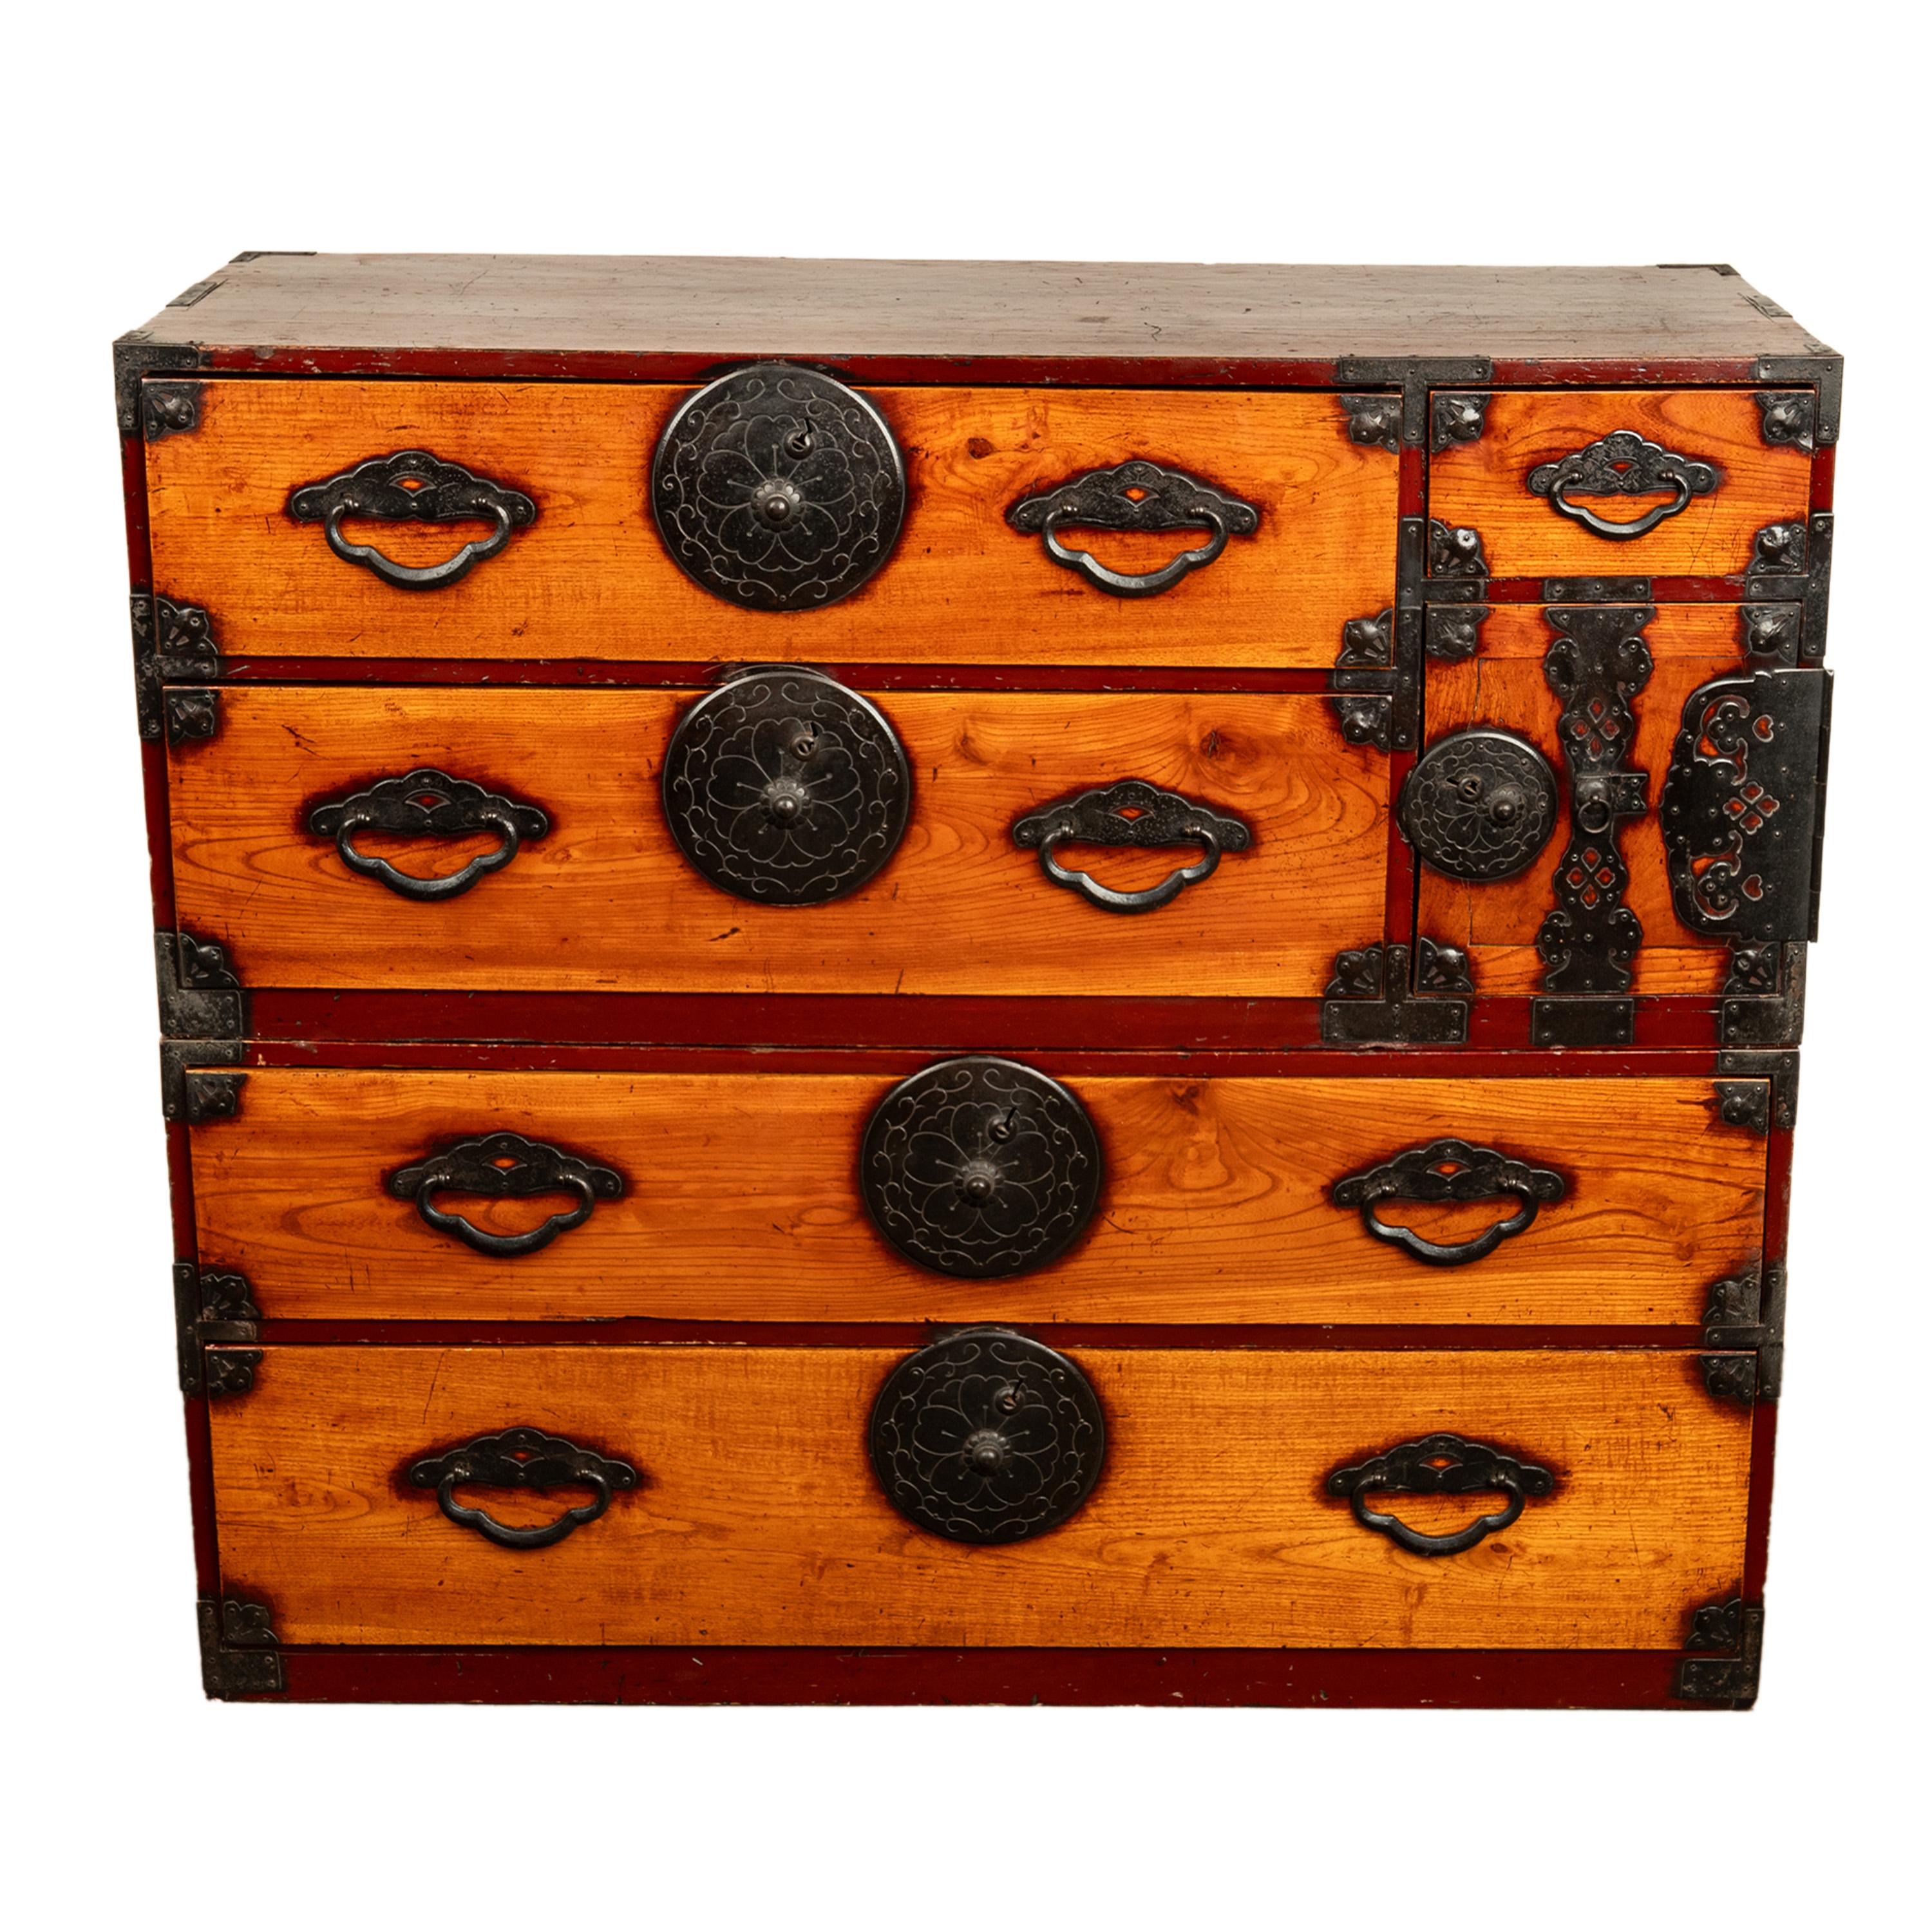 A good antique Japanese Meiji period Isho Dansu, Tansu chest, circa 1880.
This very stylish antique Japanese chest is in two sections, with hinged carrying handles at the side of each section. The chest is made from Kuri (chestnut) and Hinoki